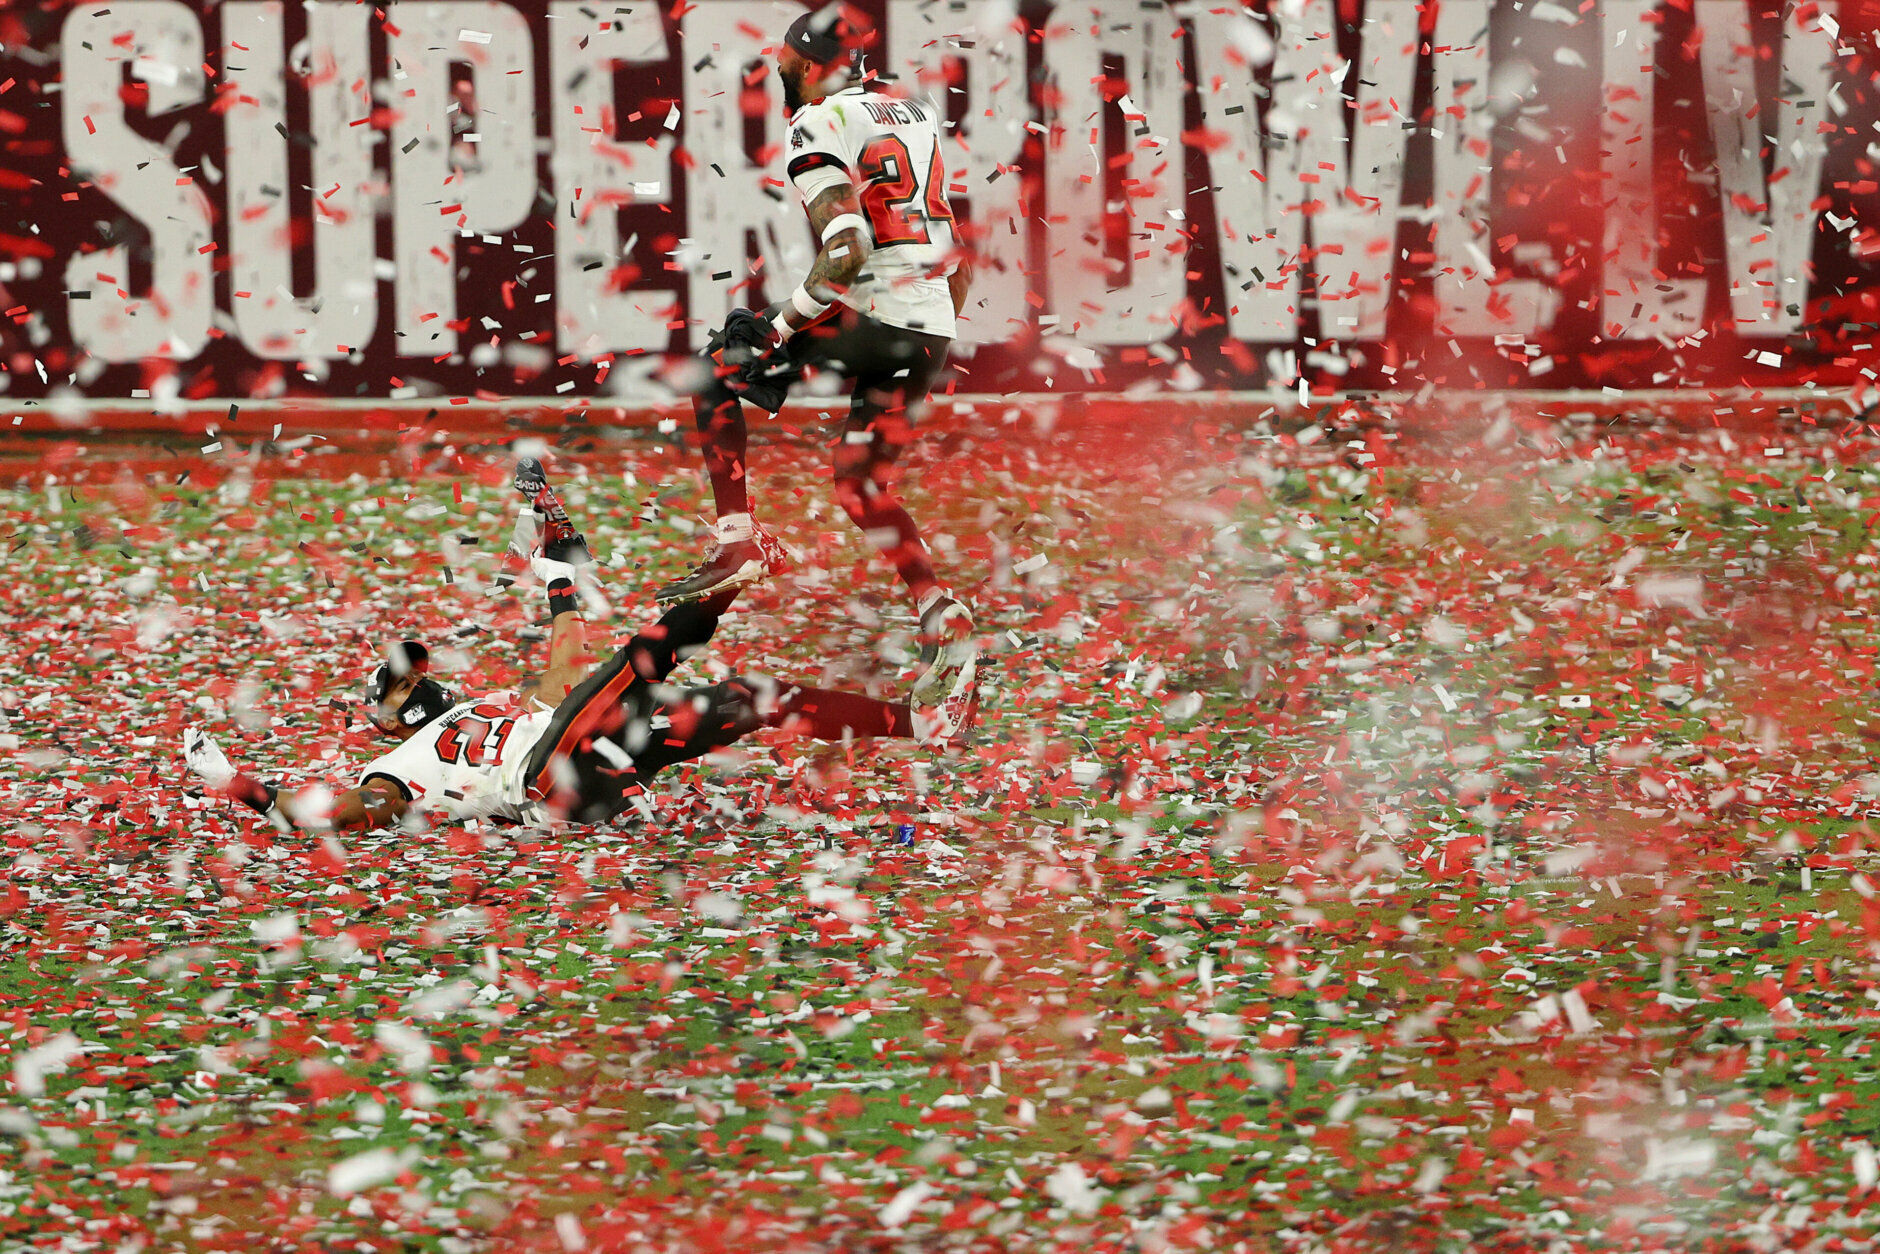 TAMPA, FLORIDA - FEBRUARY 07: Andrew Adams #26 and Carlton Davis #24 of the Tampa Bay Buccaneers celebrate as confetti falls after defeating the Kansas City Chiefs  in Super Bowl LV at Raymond James Stadium on February 07, 2021 in Tampa, Florida. The Buccaneers defeated the Chiefs 31-9. (Photo by Patrick Smith/Getty Images)